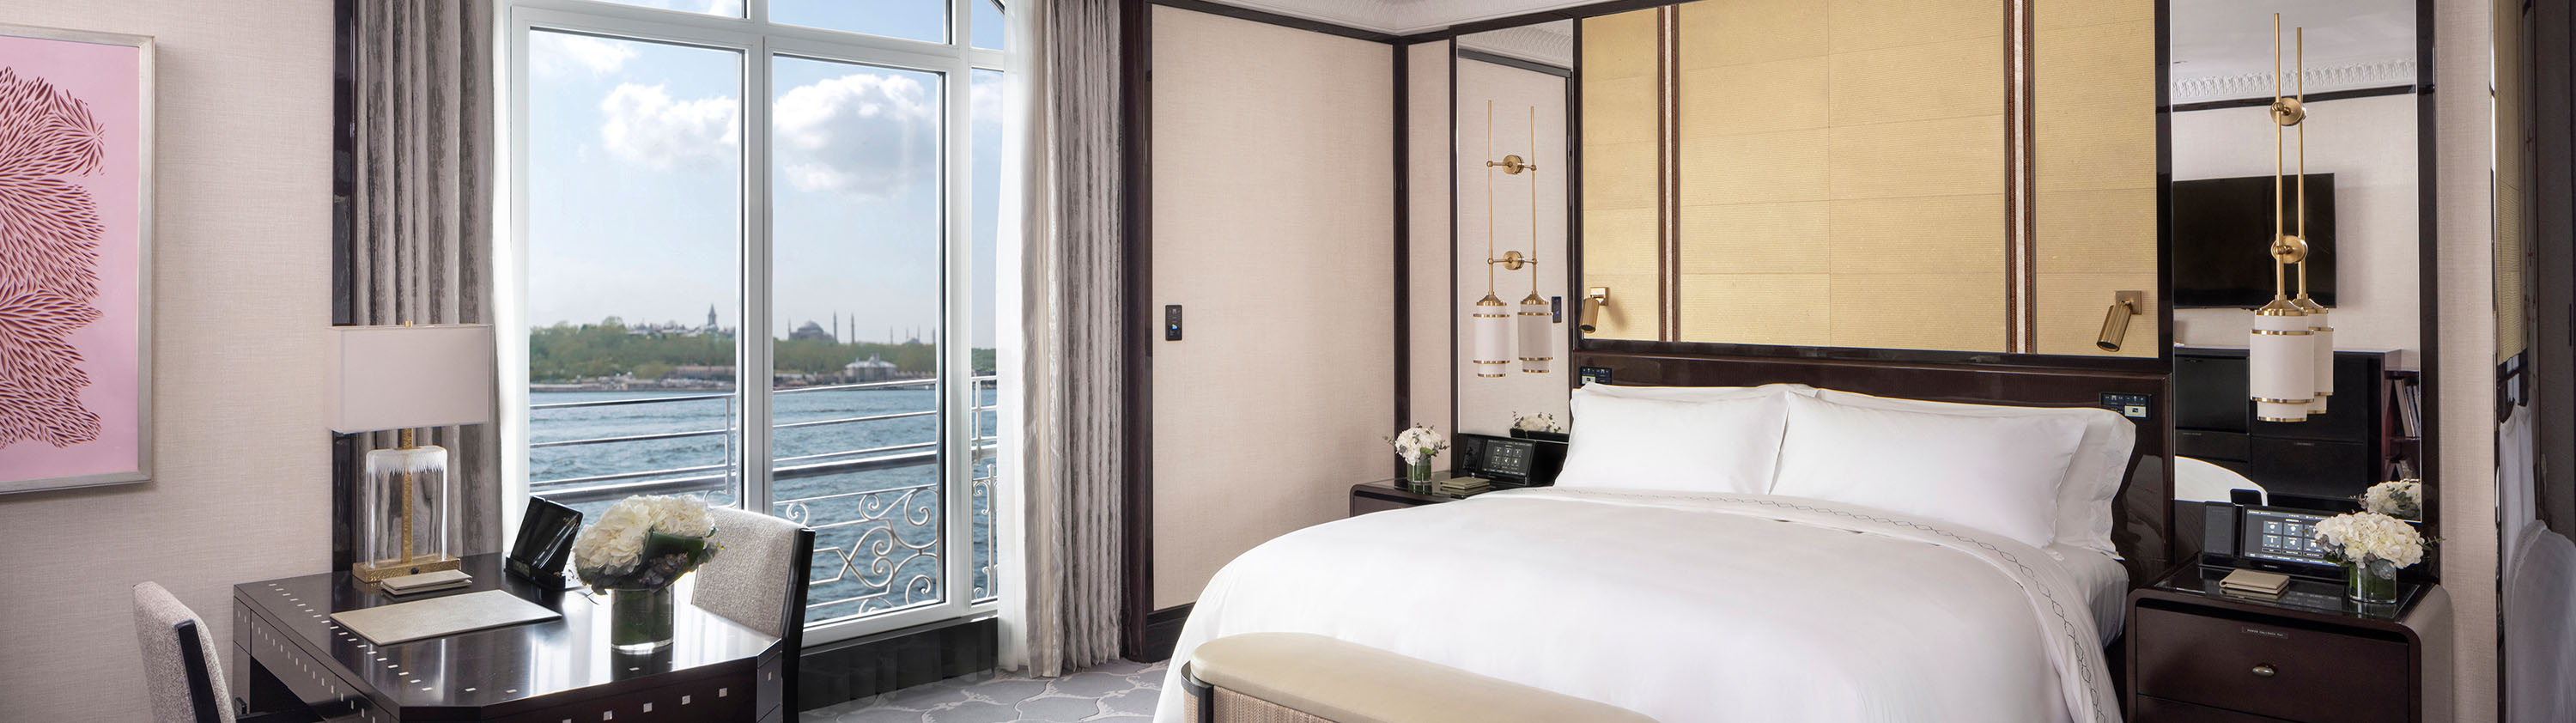 Executive Hotel Suite with City-View | Four Seasons Hotel Chicago